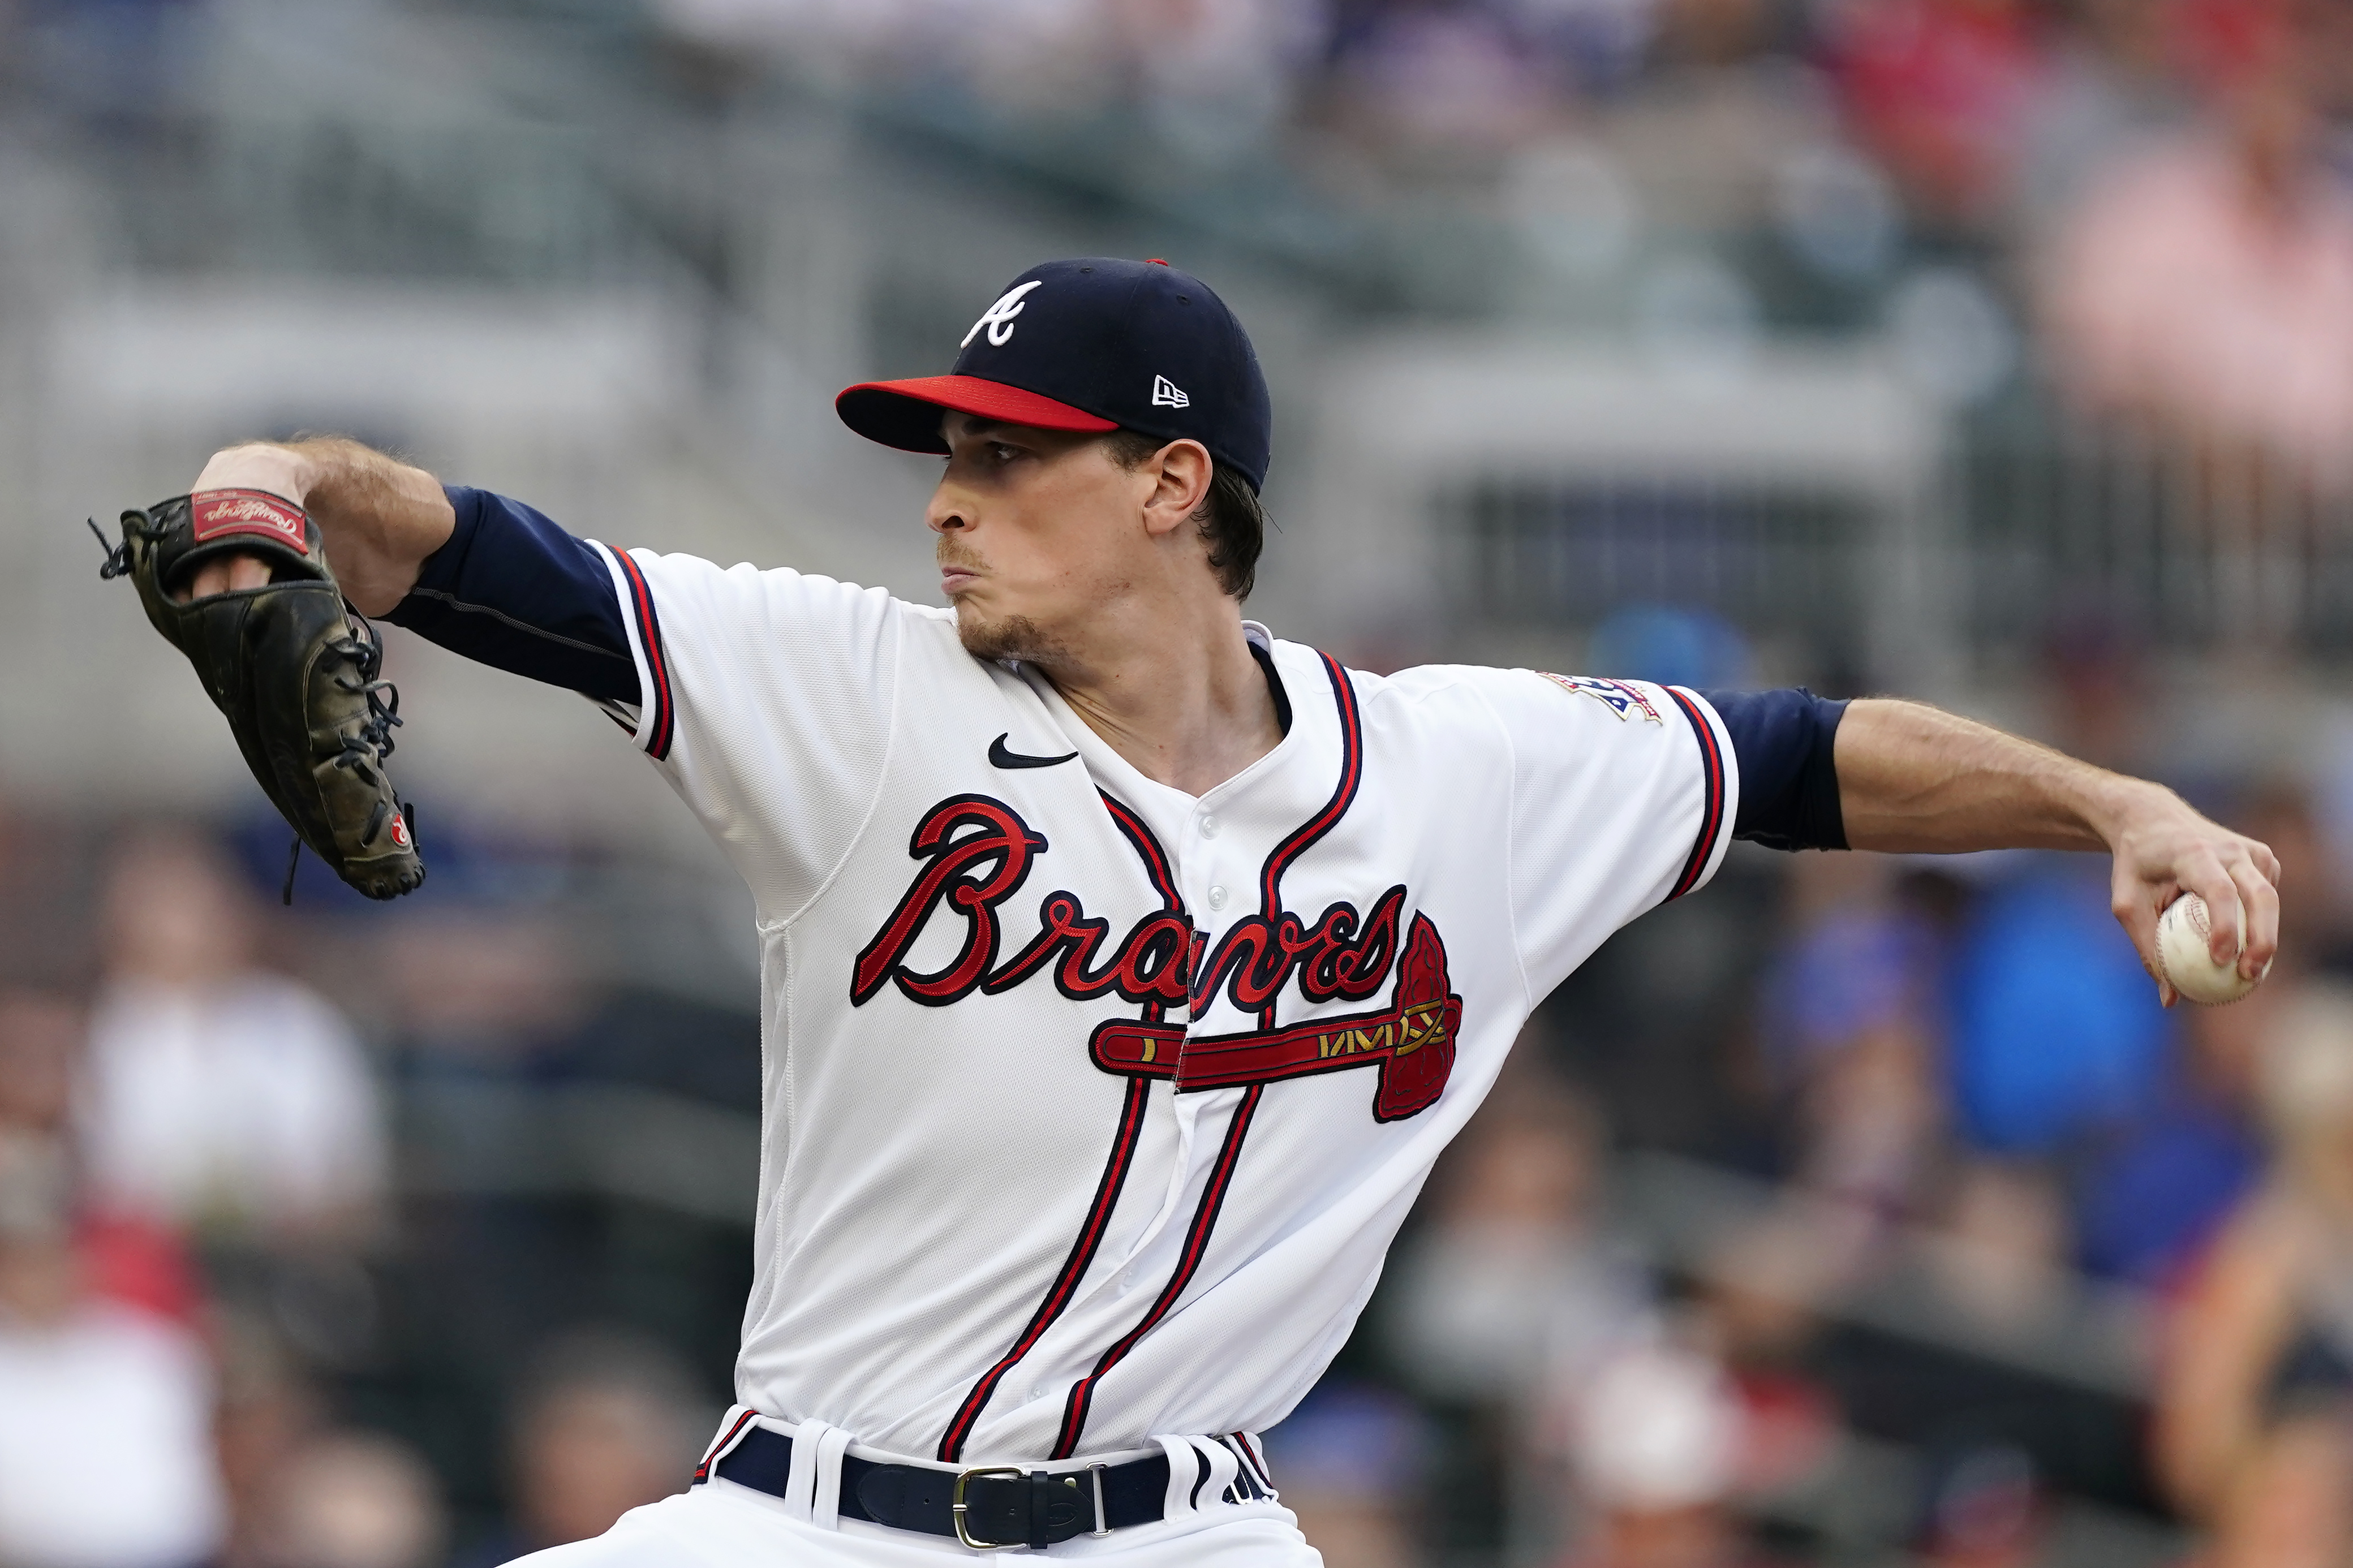 LEADING OFF: Vlad takes his cuts, Braves hit the road